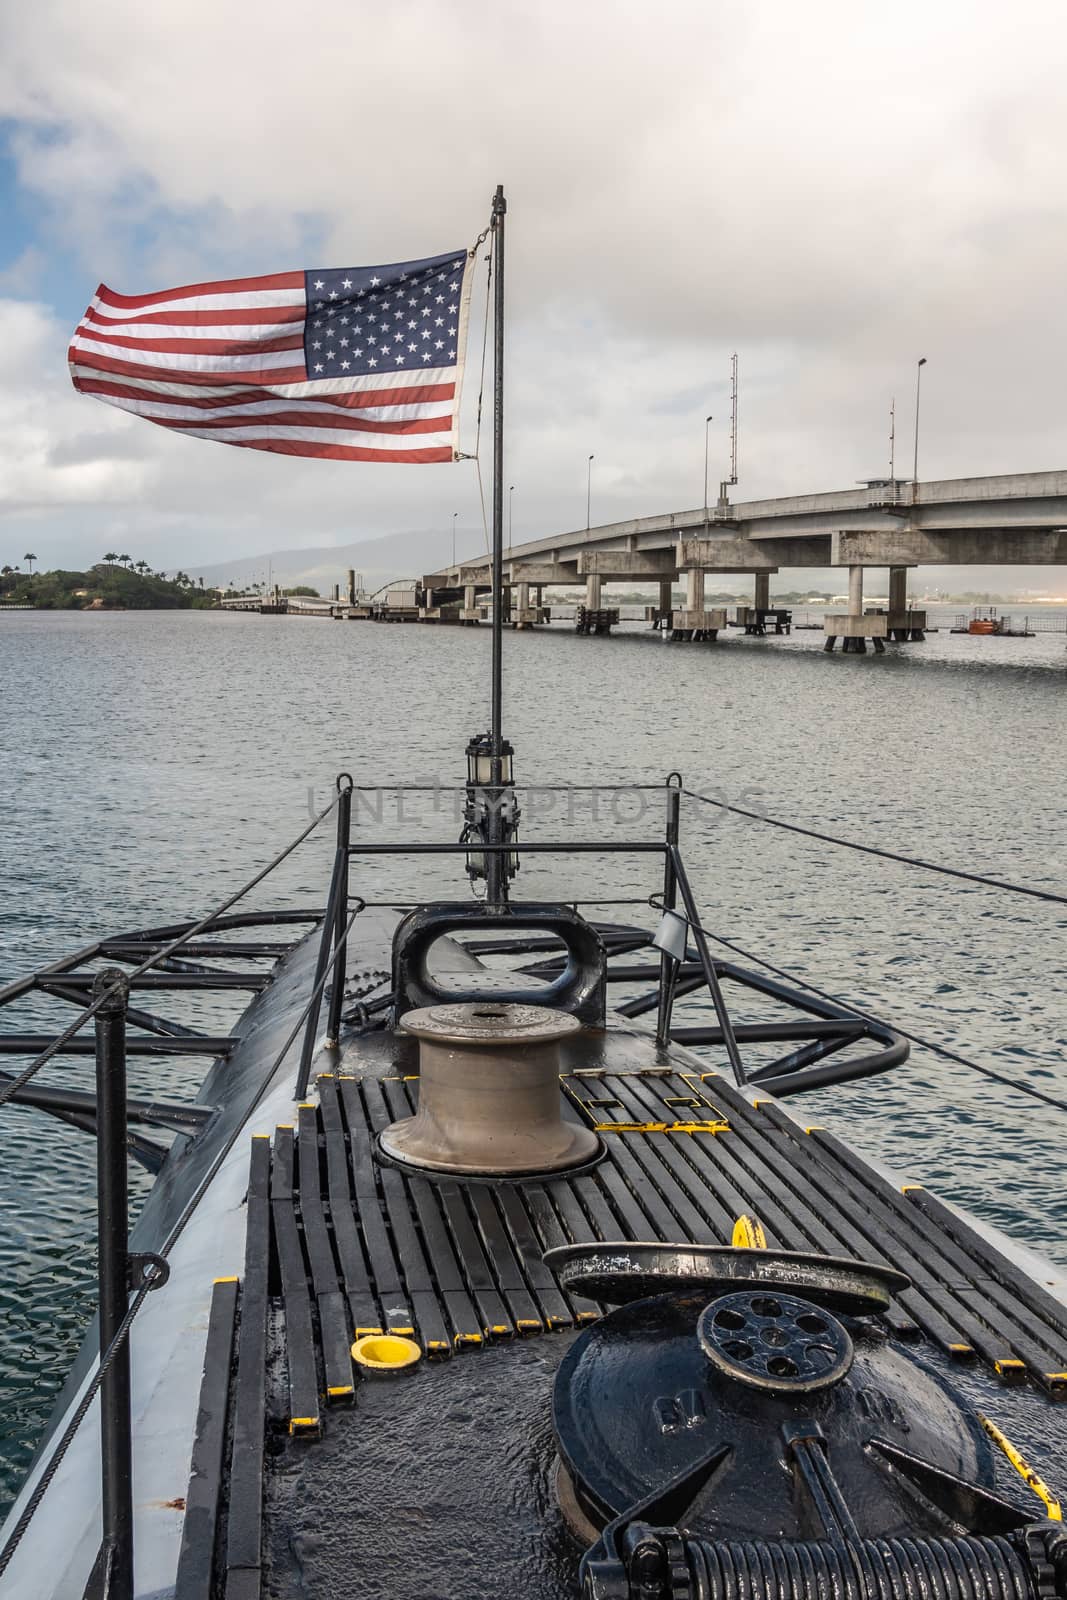 Oahu, Hawaii, USA. - January 10, 2020: Pearl Harbor. Stern with American flag of long submarine USS Bowfin. Part of Ford Island bridge along. All under gray sky with blue patch.